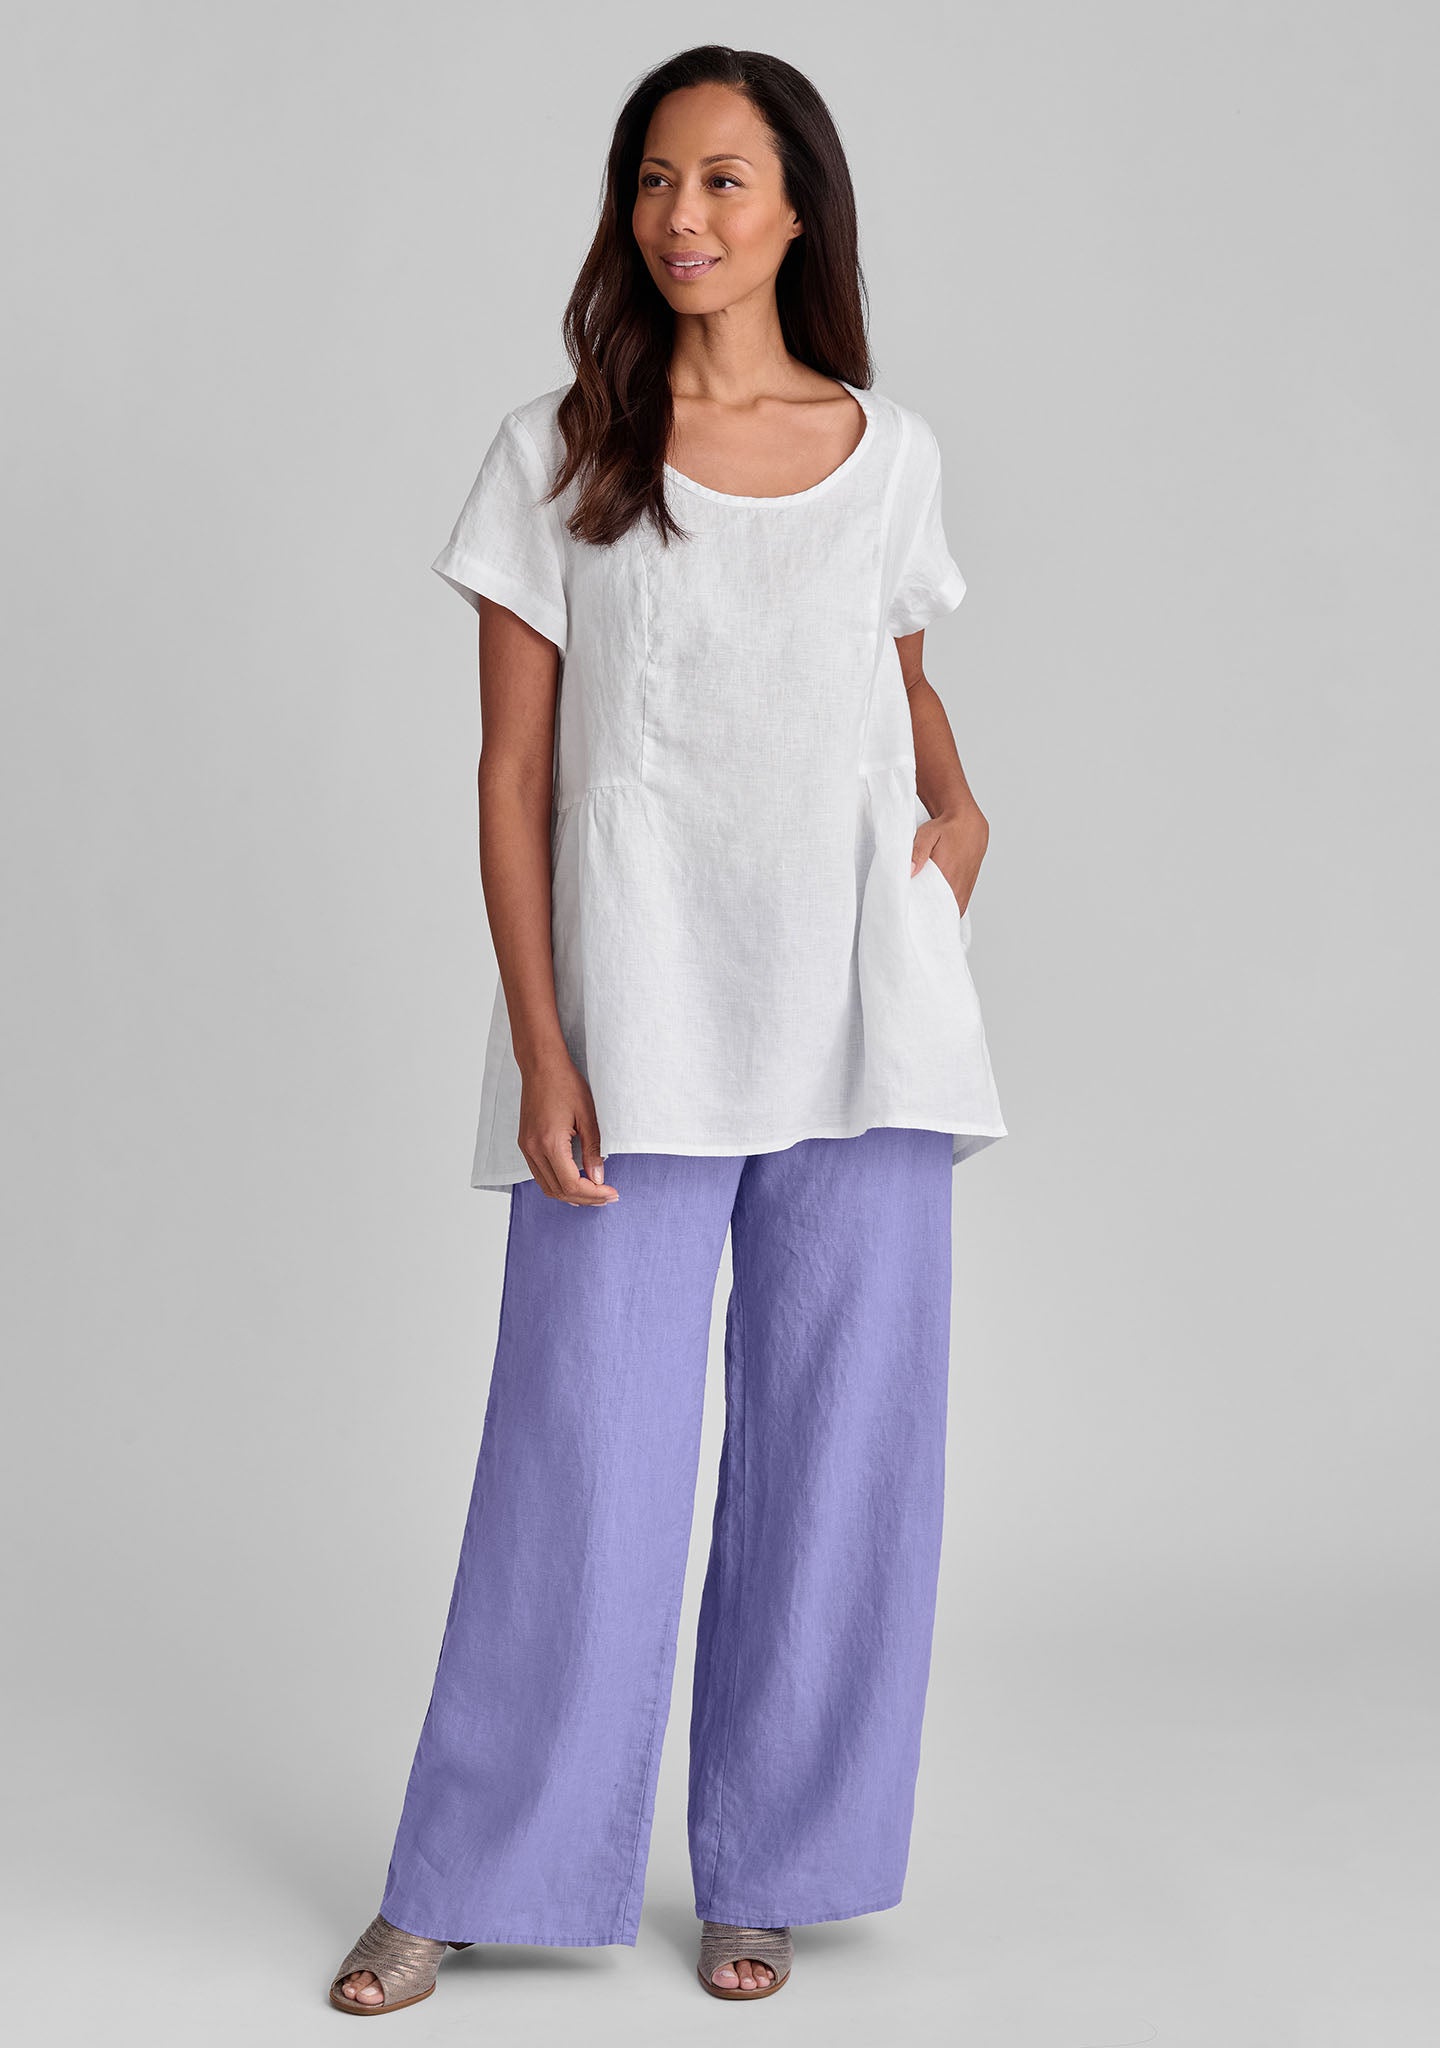 FLAX linen shirt in white with linen pants in purple